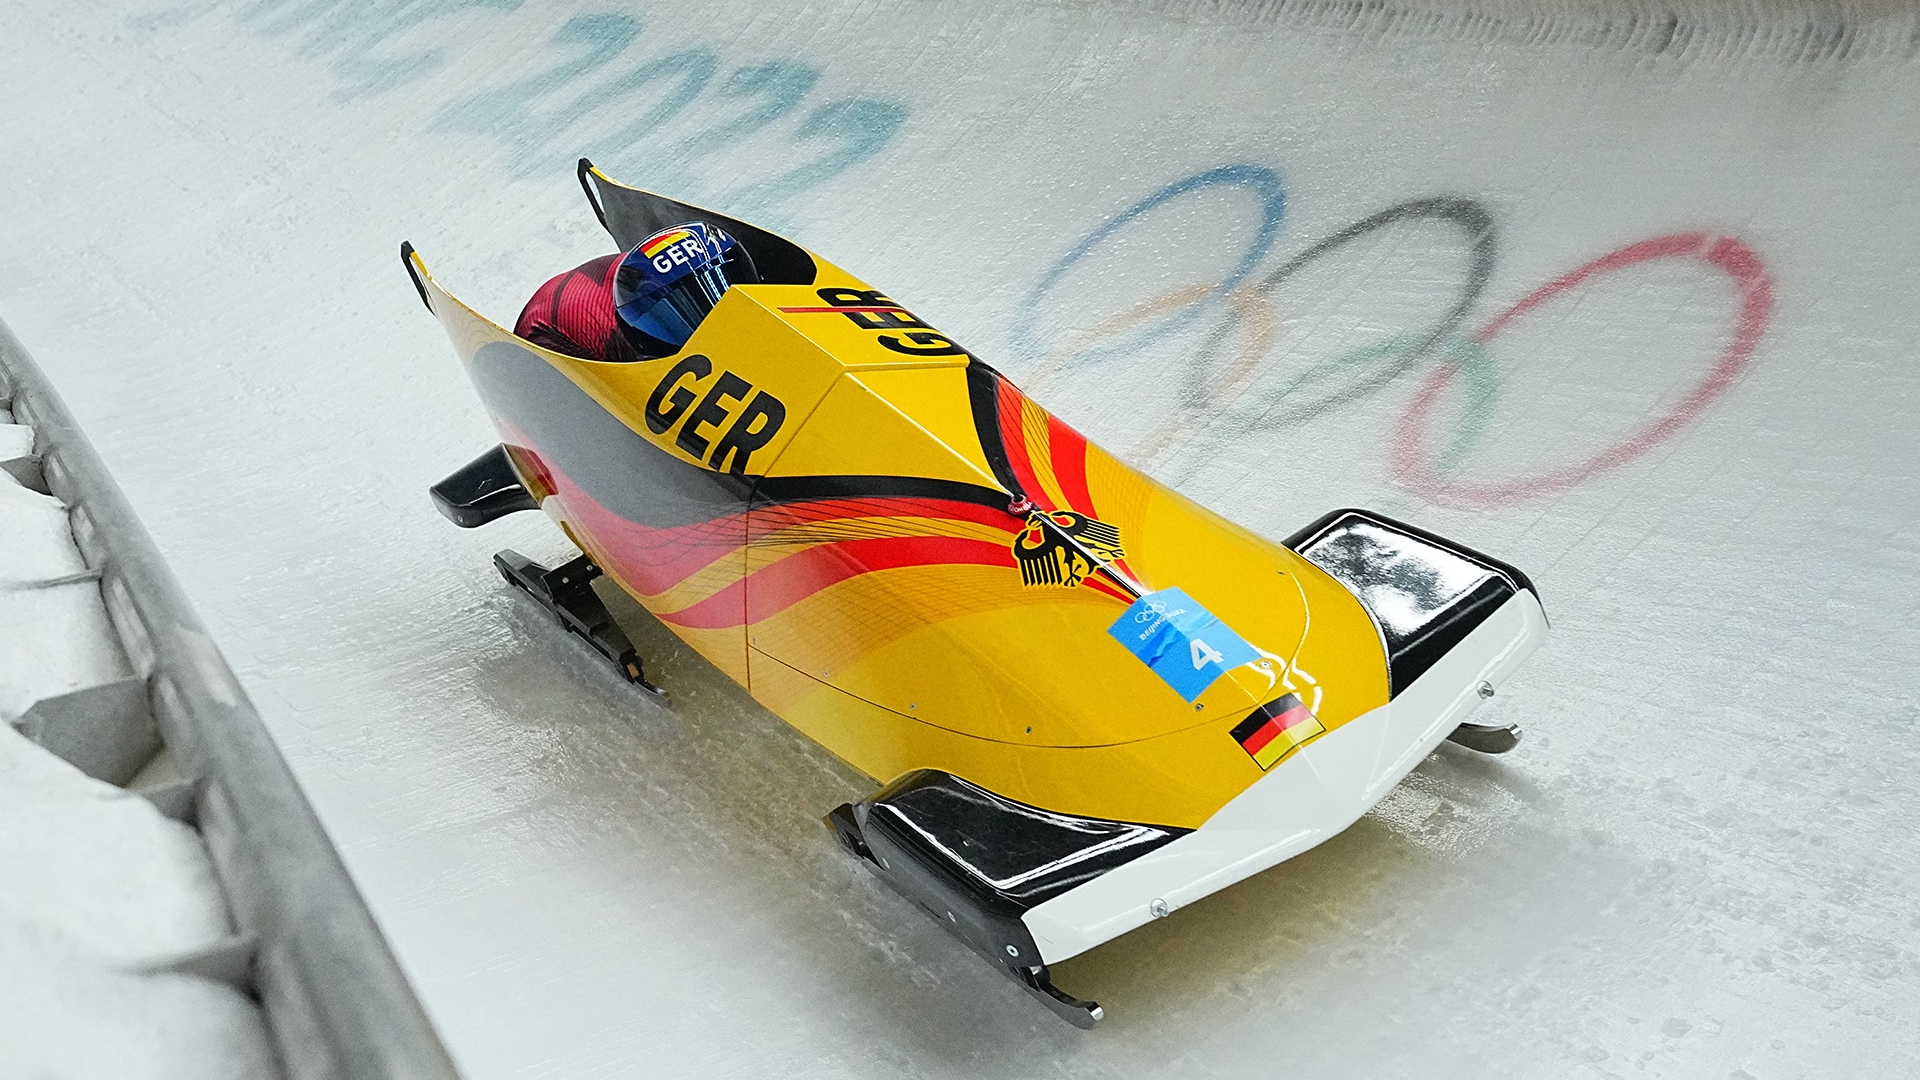 Germany Wins Gold, Silver in Winter Olympics Four-Man Bobsled